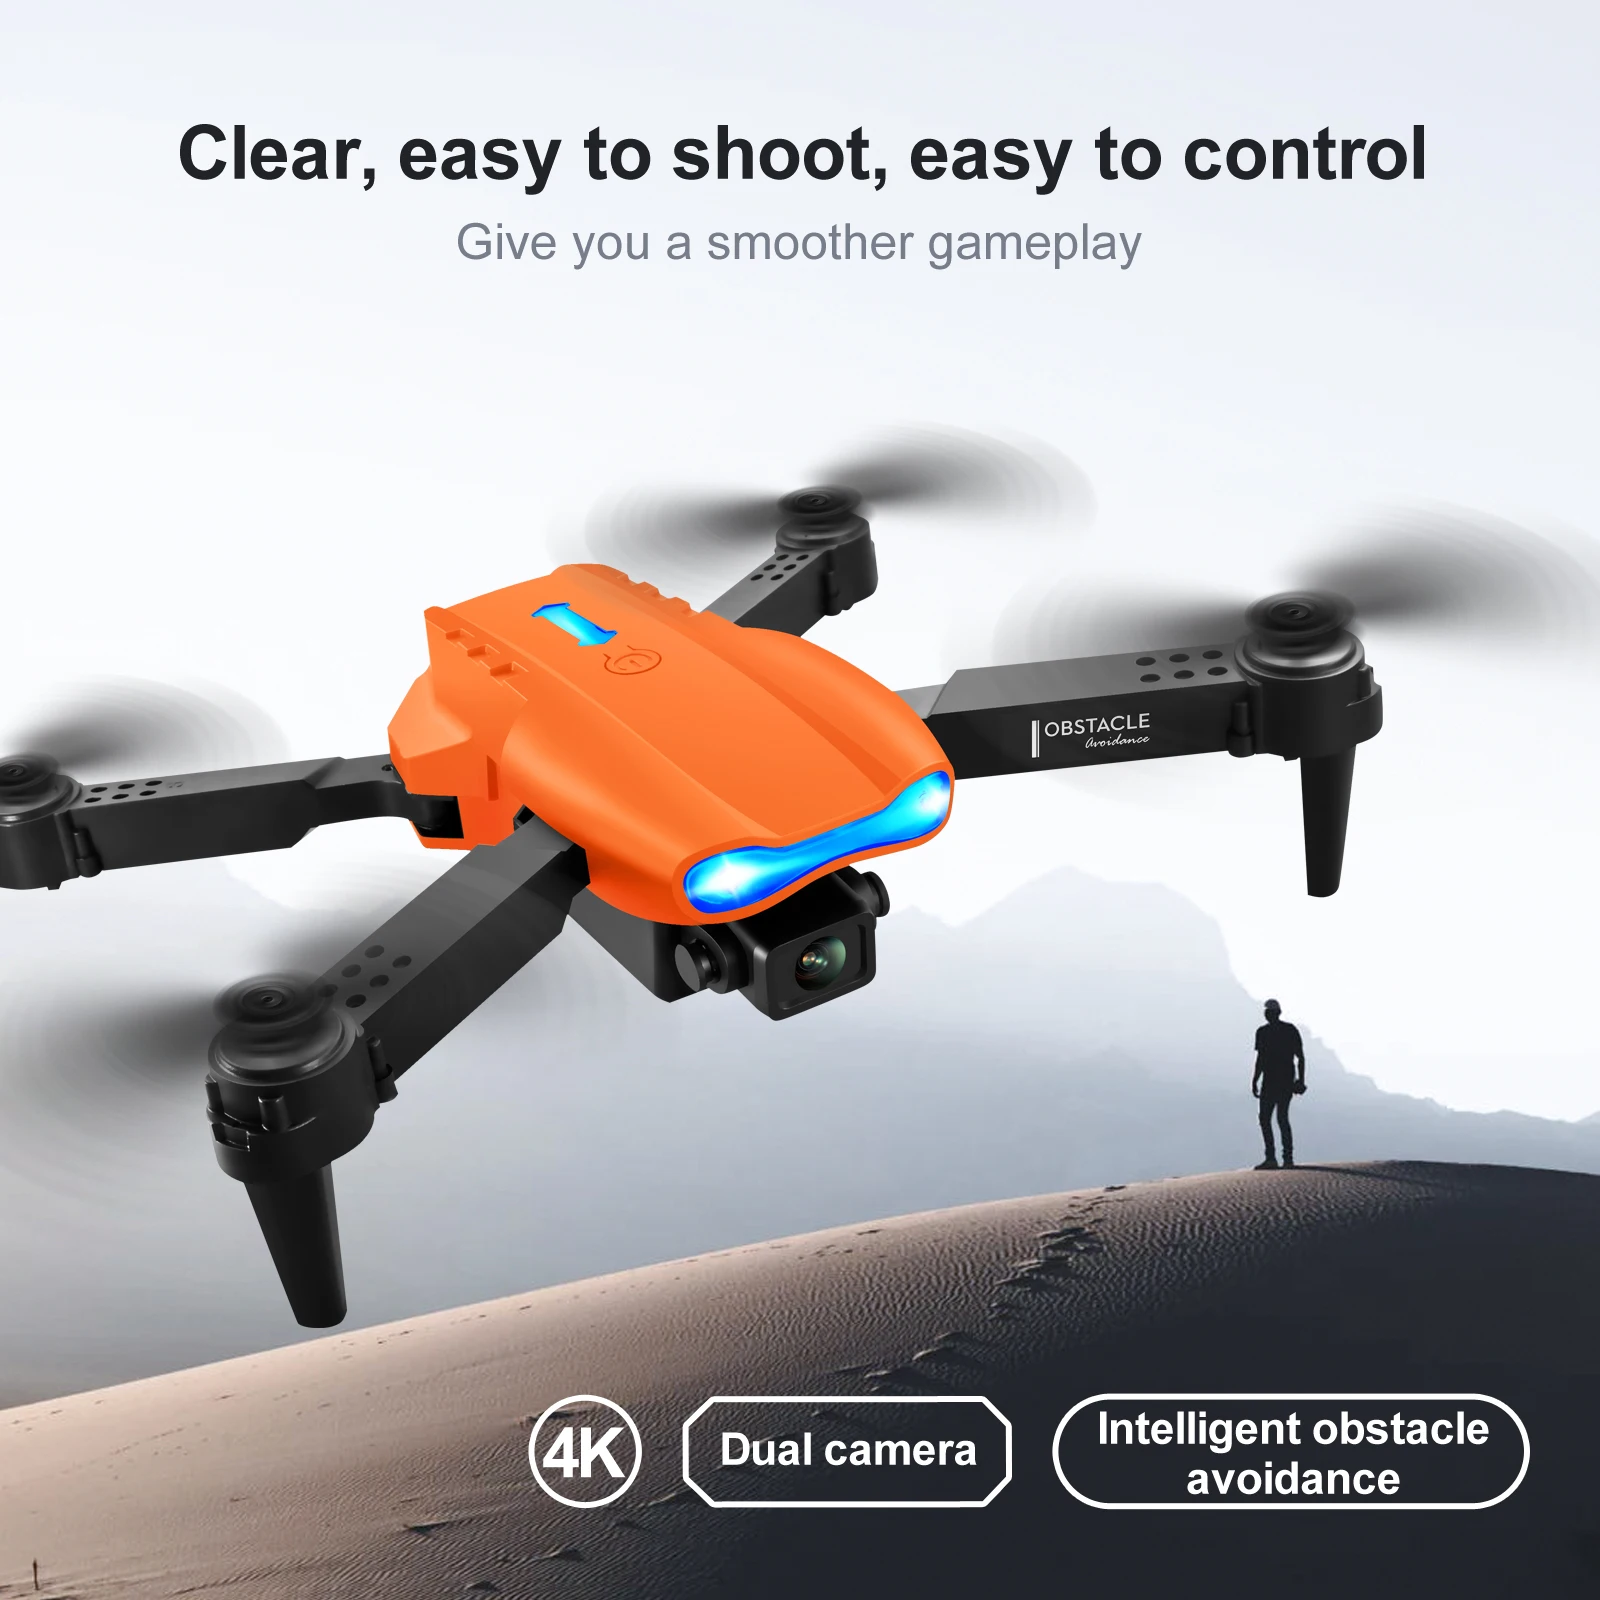 LSRC Latest E99 K3 PRO RC Drone 4K Profesional HD Dual Camera Obstacle Avoidance WIFI FPV Foldable Quadcopter Dron Gift Toy mini rc foldable drone quadcopter